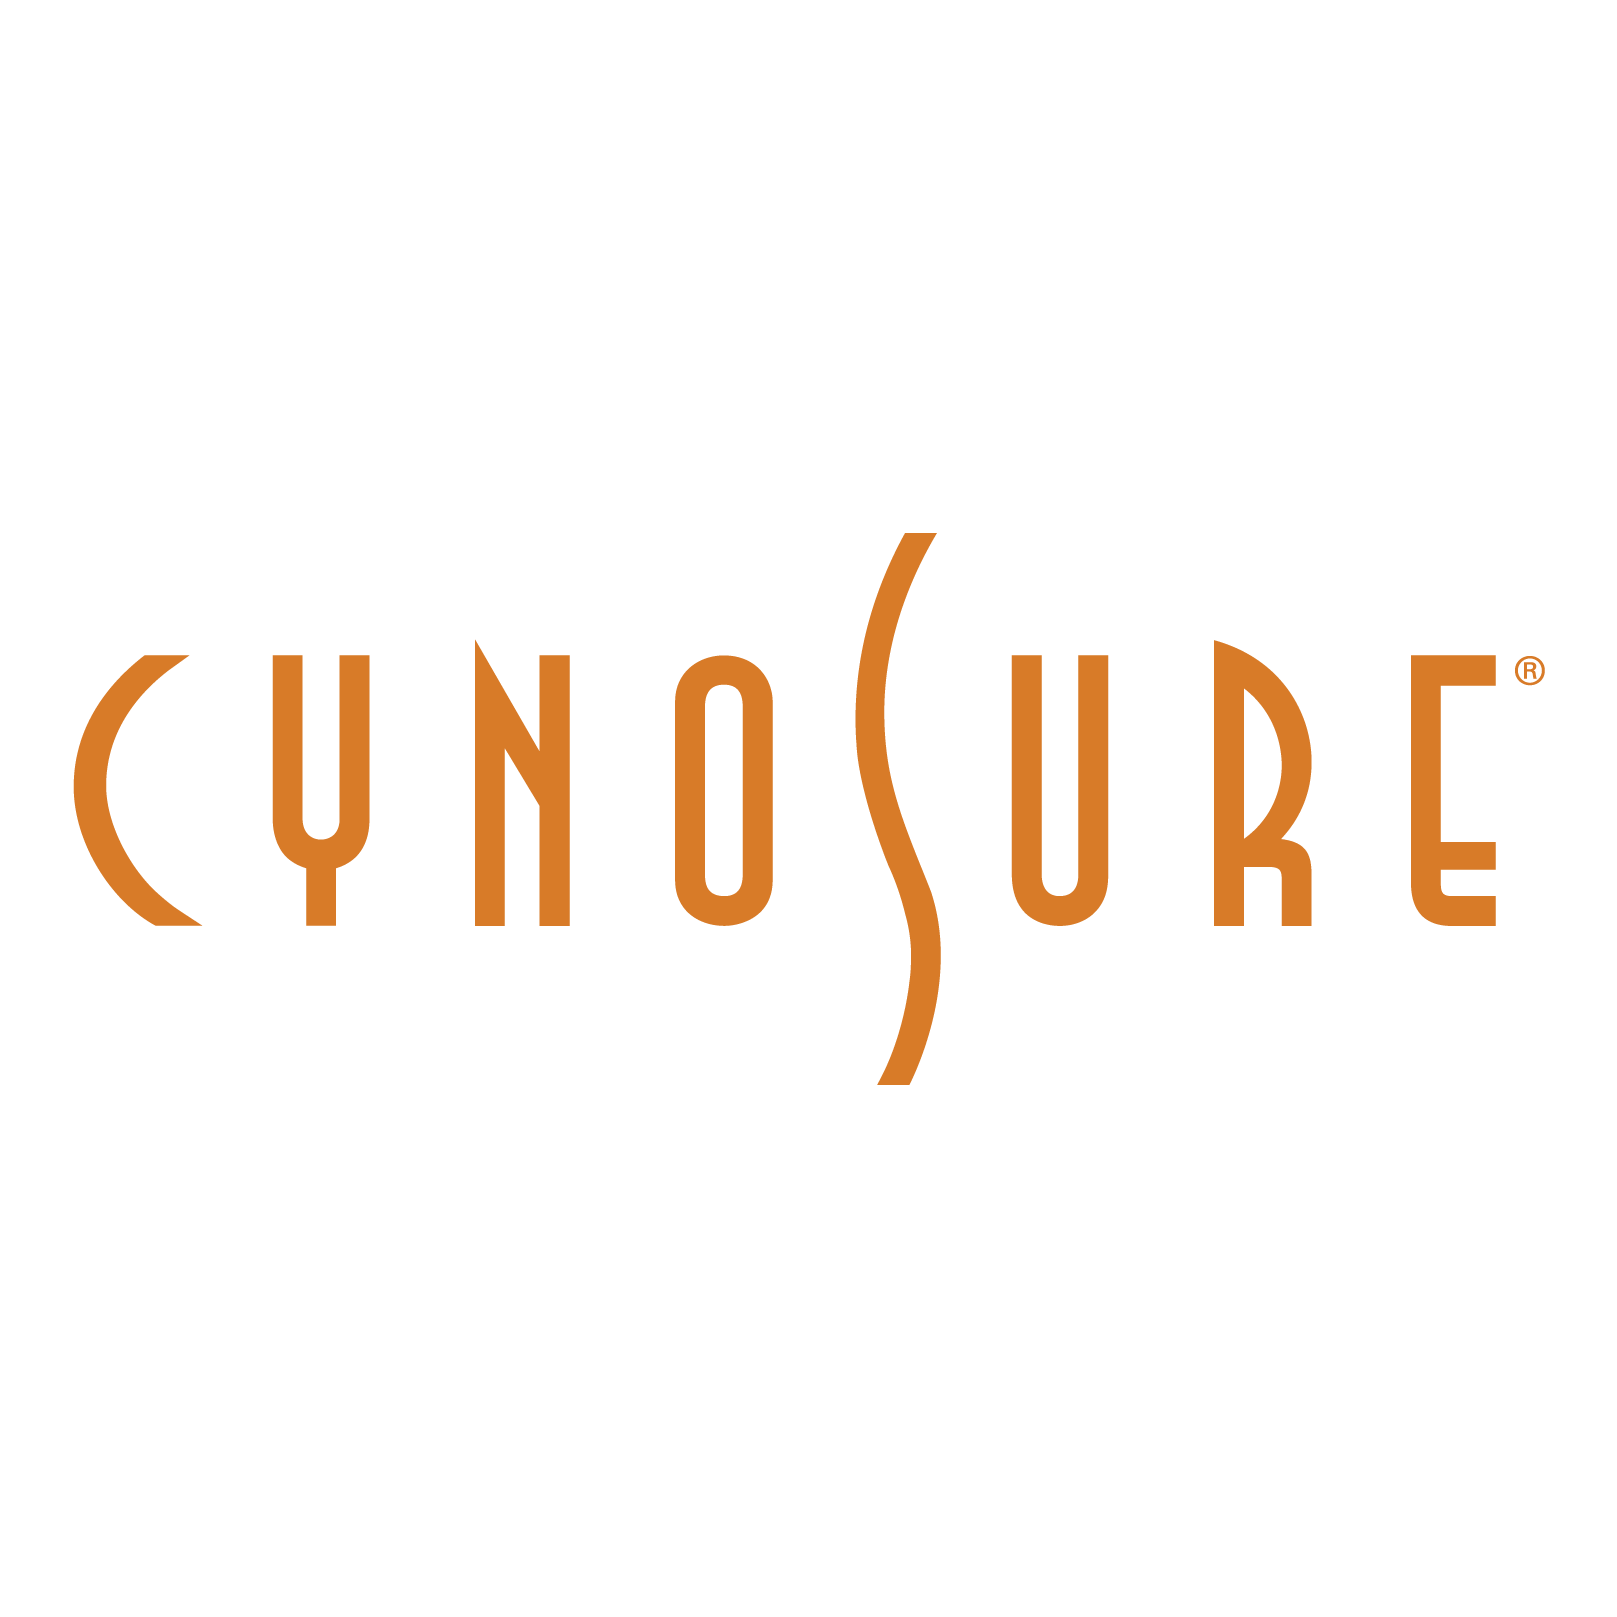 At Cynosure, we're committed to ensuring patients get the best possible treatment. Follow us for the latest information, or visit https://t.co/06d068Aszc.